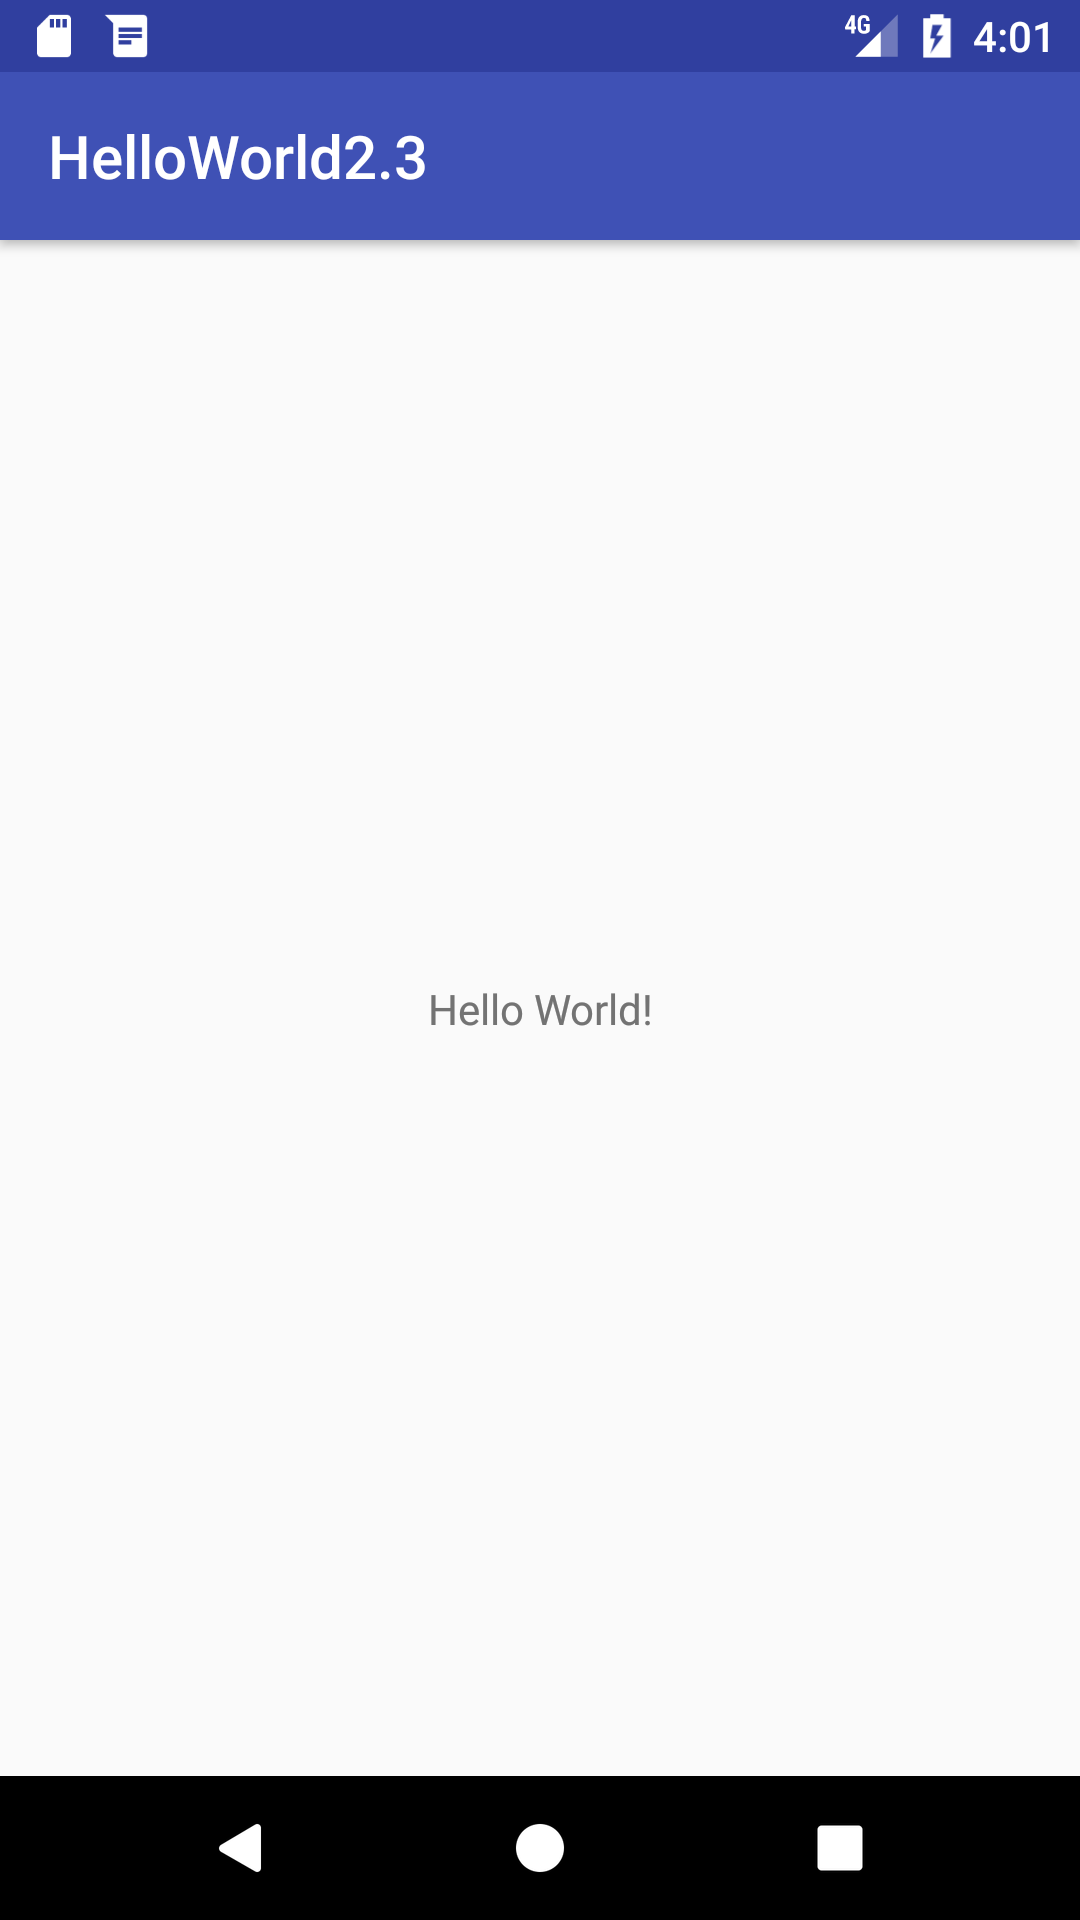 Appearance of finished Hello World App